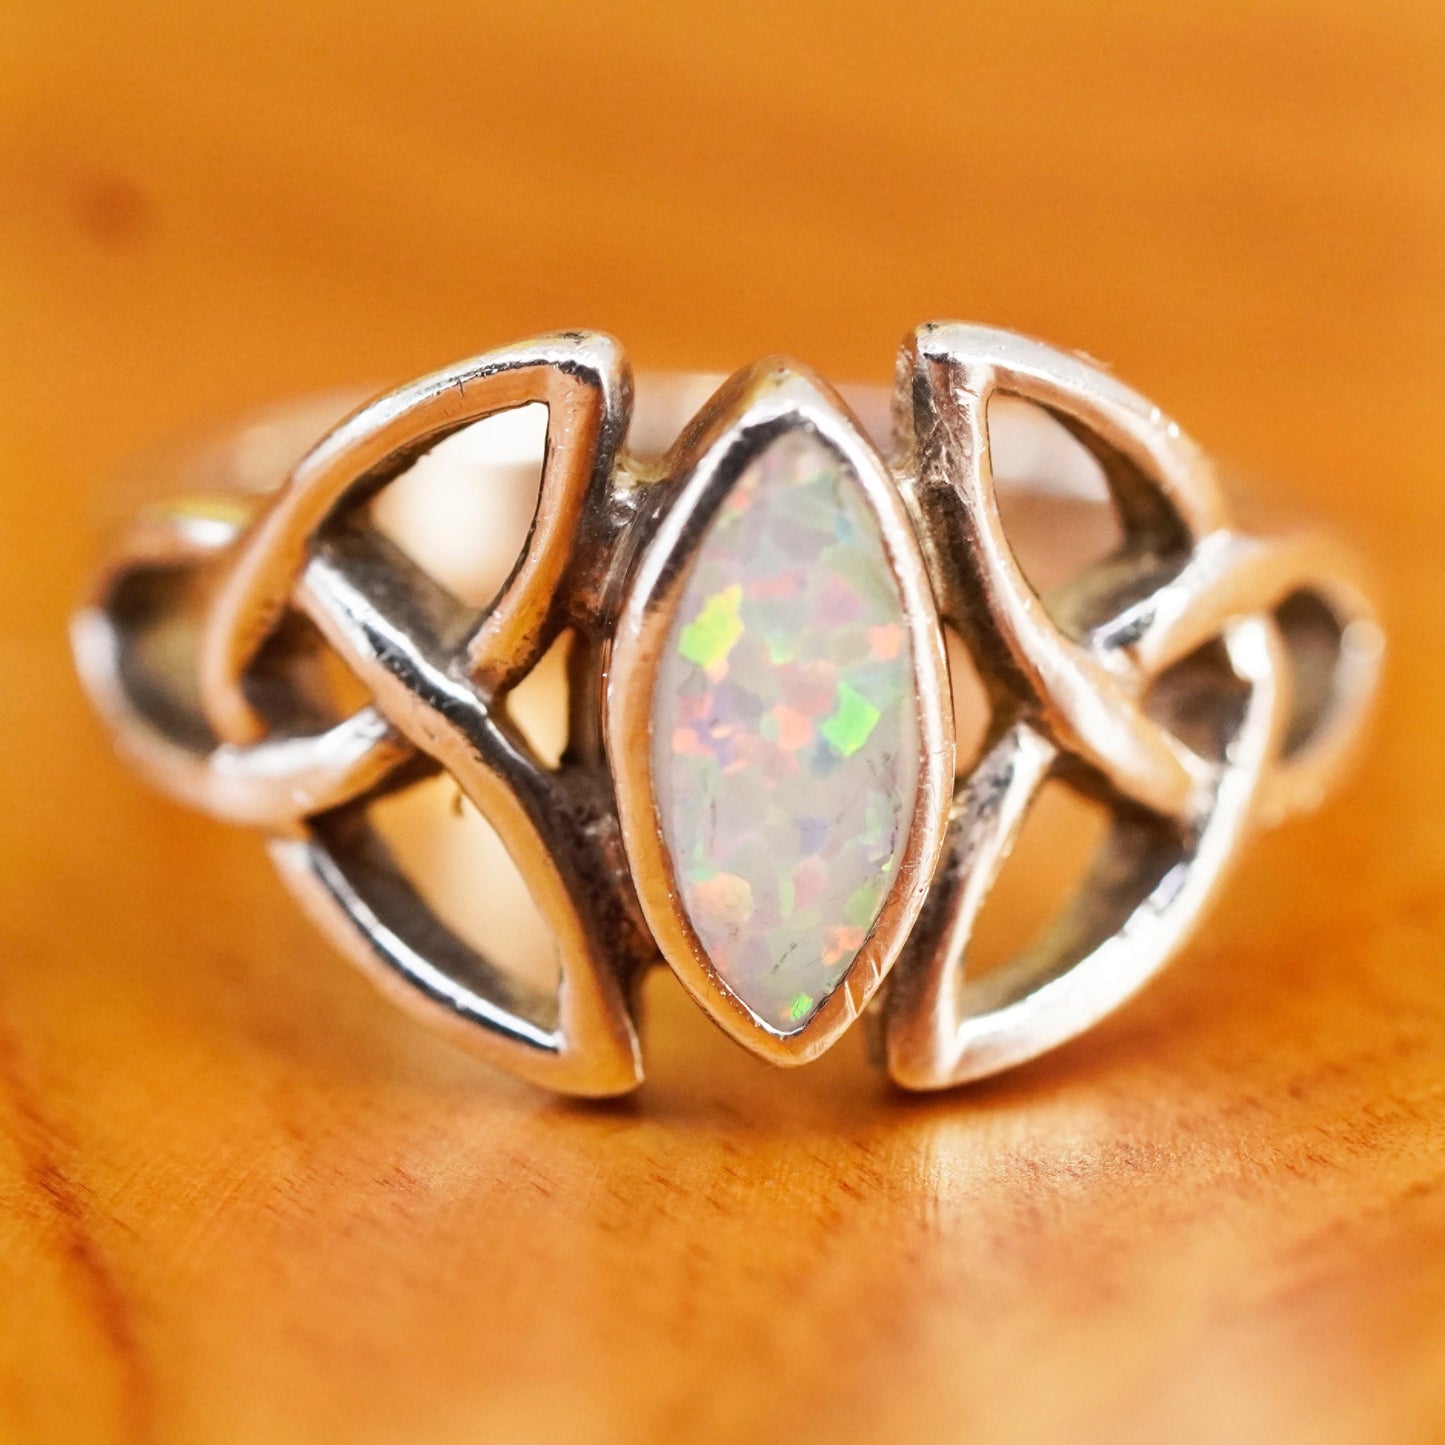 Size 4.75, vintage Irish Celtic knot Sterling 925 silver handmade ring w/ opal